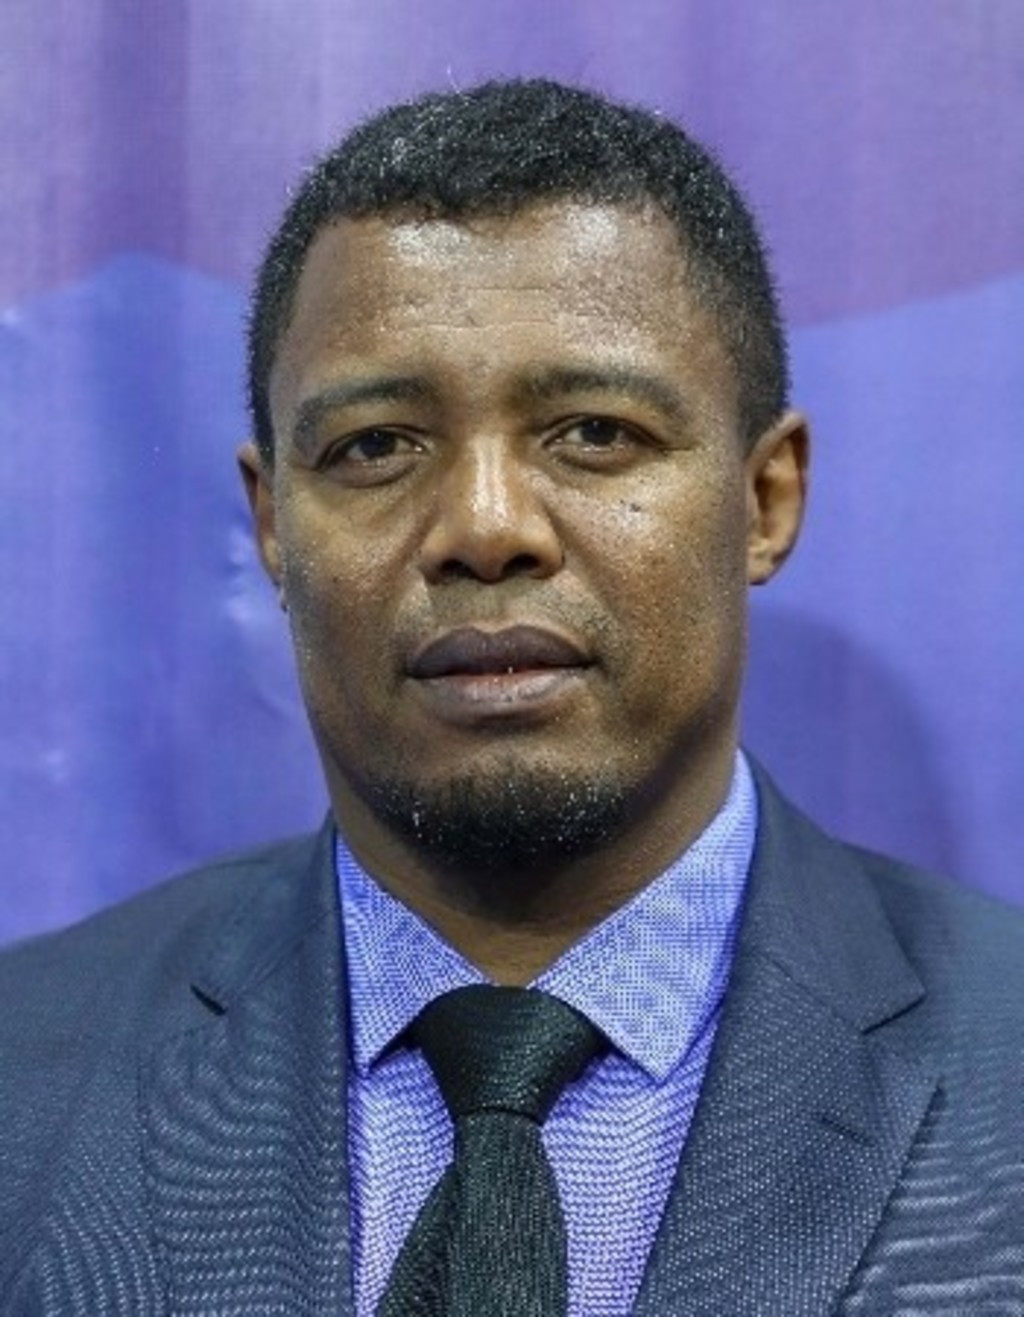 Malagasy Judo Federation President Siteny Randrianasolo-Niaiko says he will ensure guidelines are in place to safeguard athletes against COVID-19 ©AJU